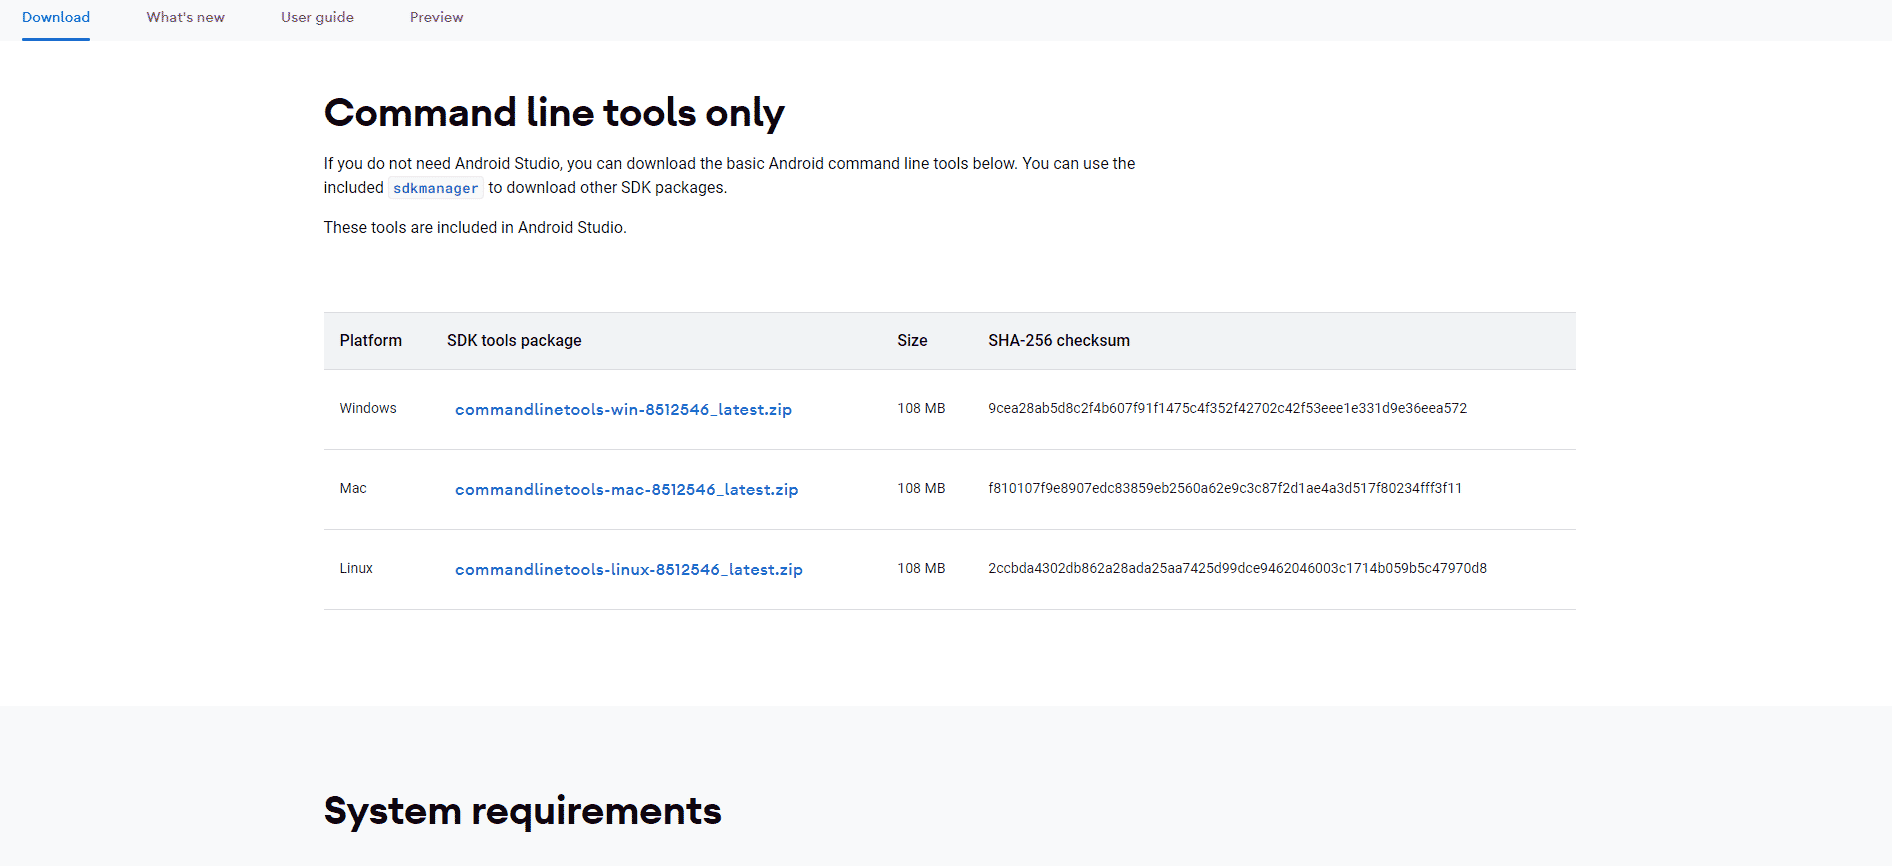 command line tools only section